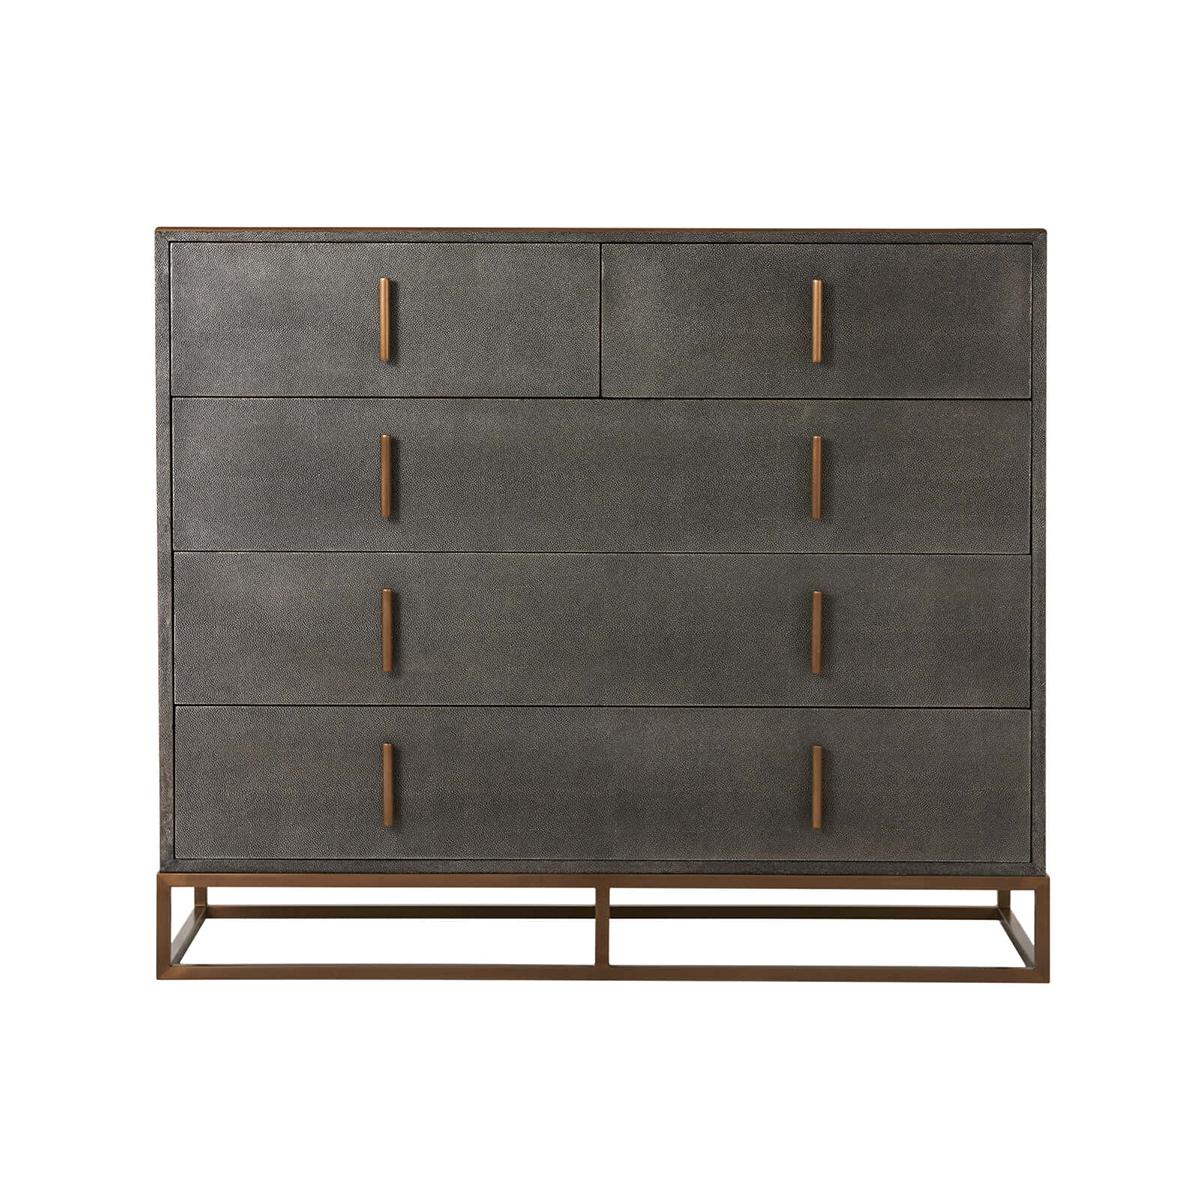 Modern Leather Chest of drawers with a shagreen embossed leather wrapped case in our dark tempest finish with two short above three long drawers, brass finish hardware and cube base.

Dimensions: 50